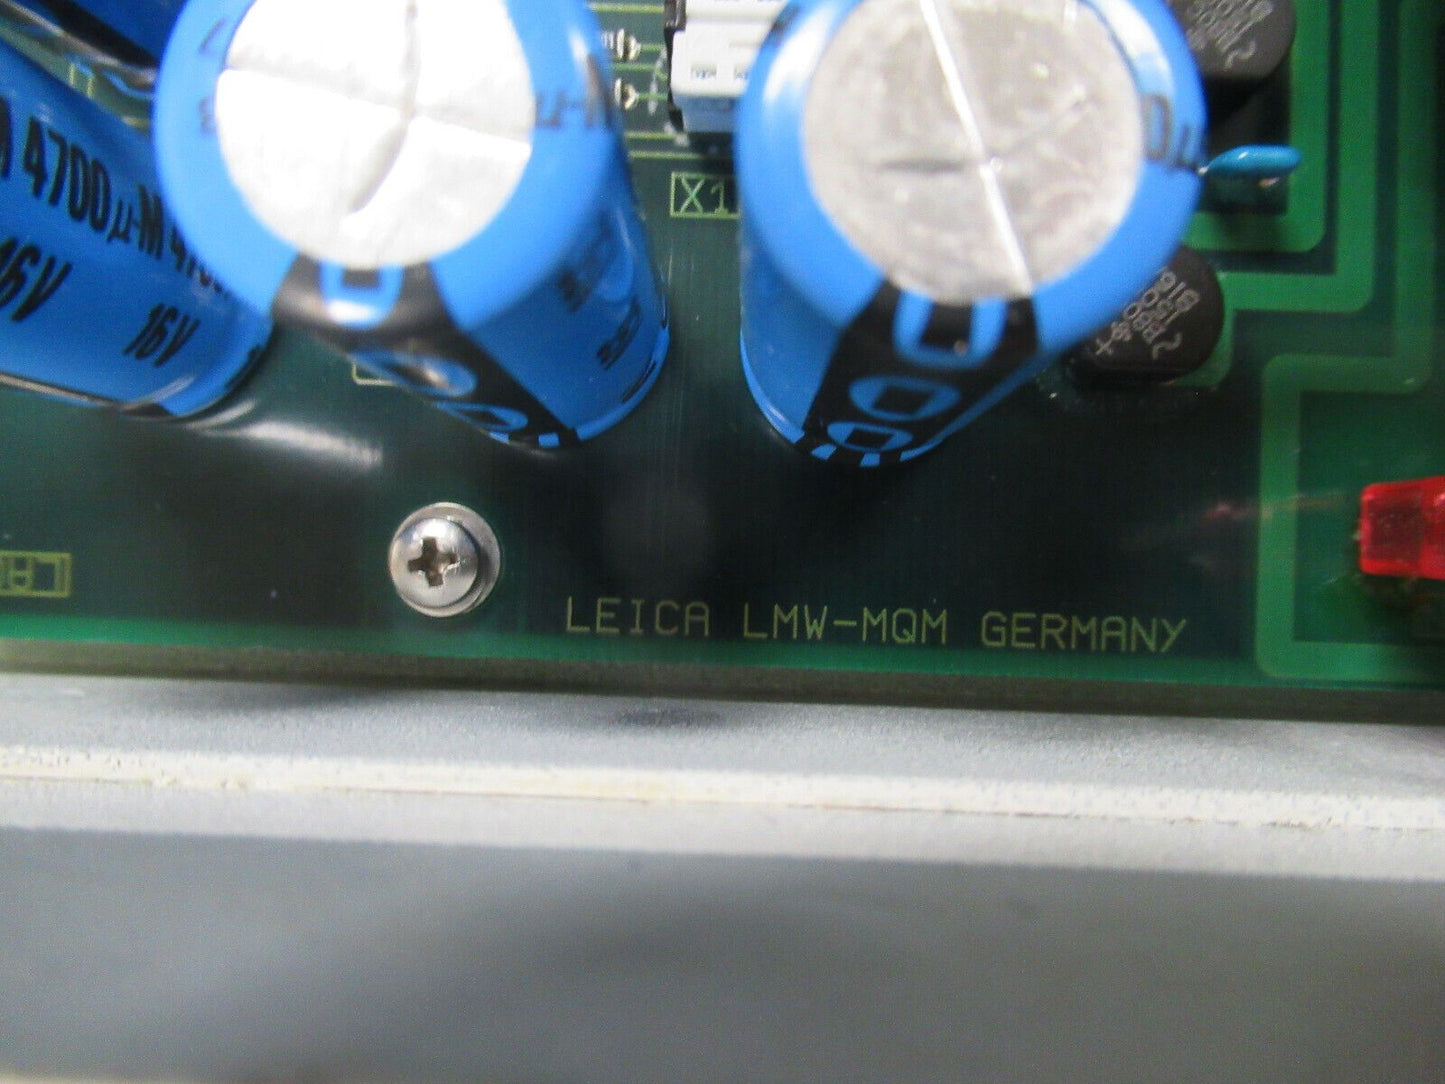 LEICA GERMANY DMRB LMW-MQM POWER SUPPLY  MICROSCOPE PART AS PICTURED R3-B-70